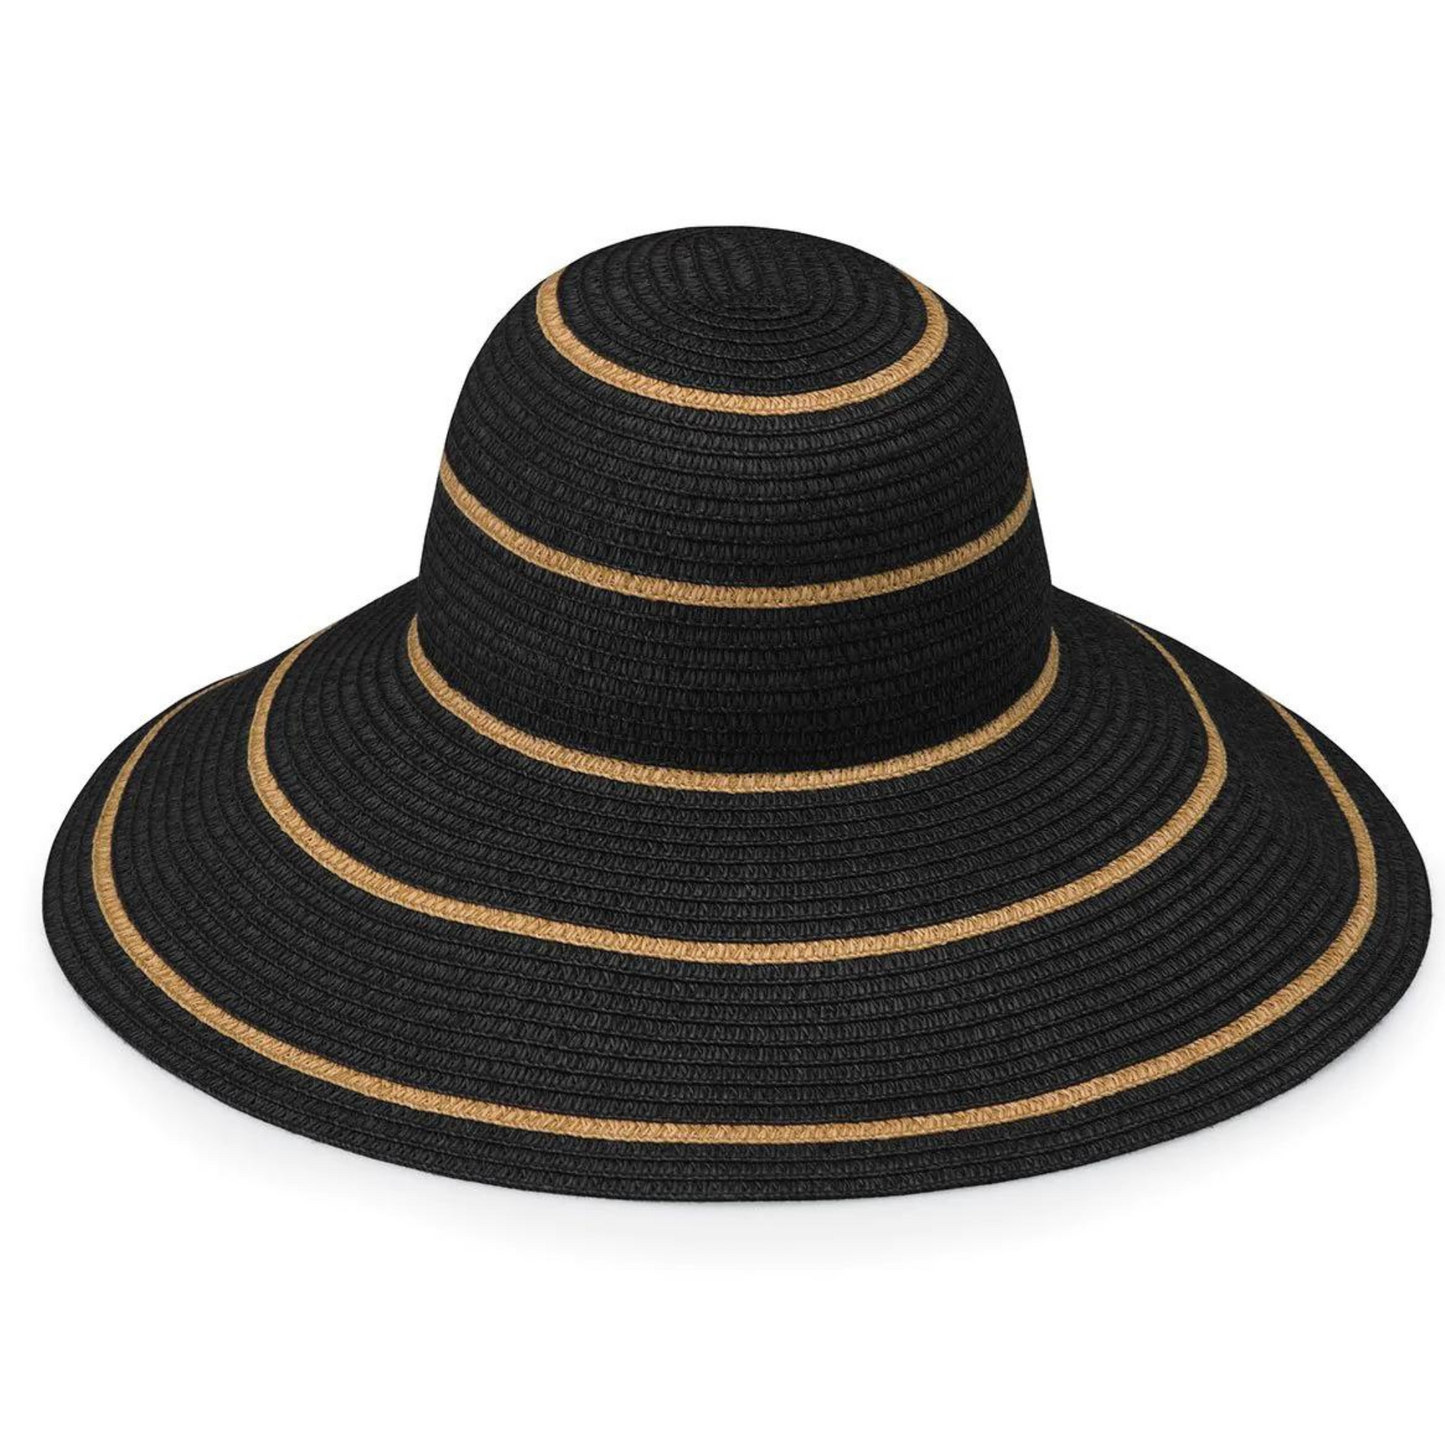 Front view of the hat, showing the stripes and the 5 inch brim.